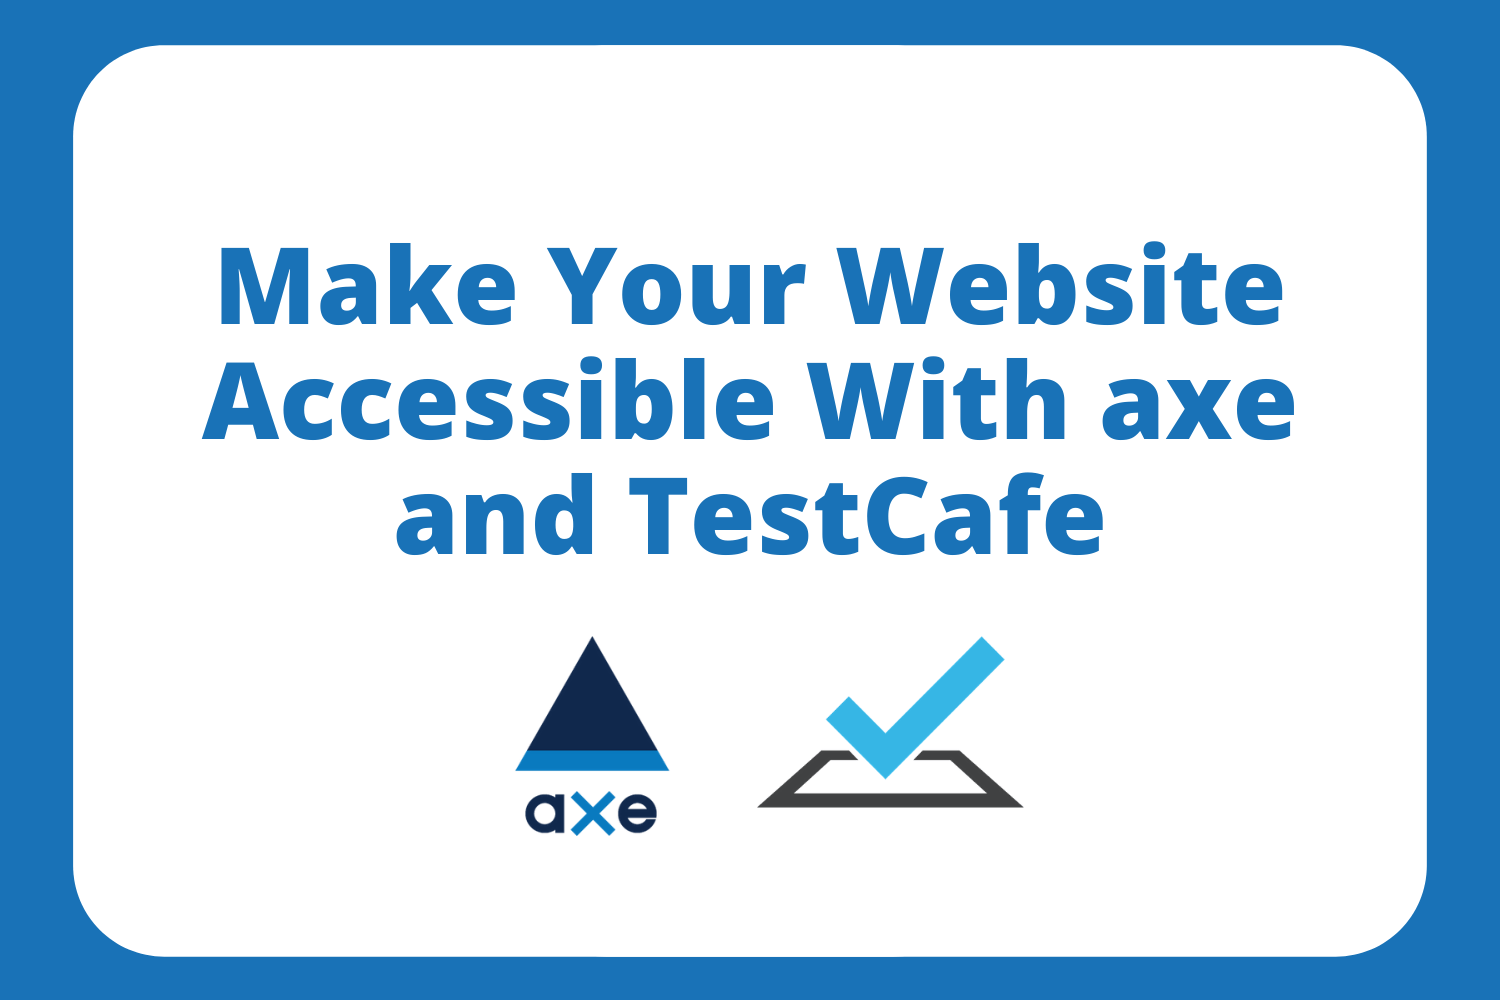 Make Your Website Accessible With axe and TestCafe